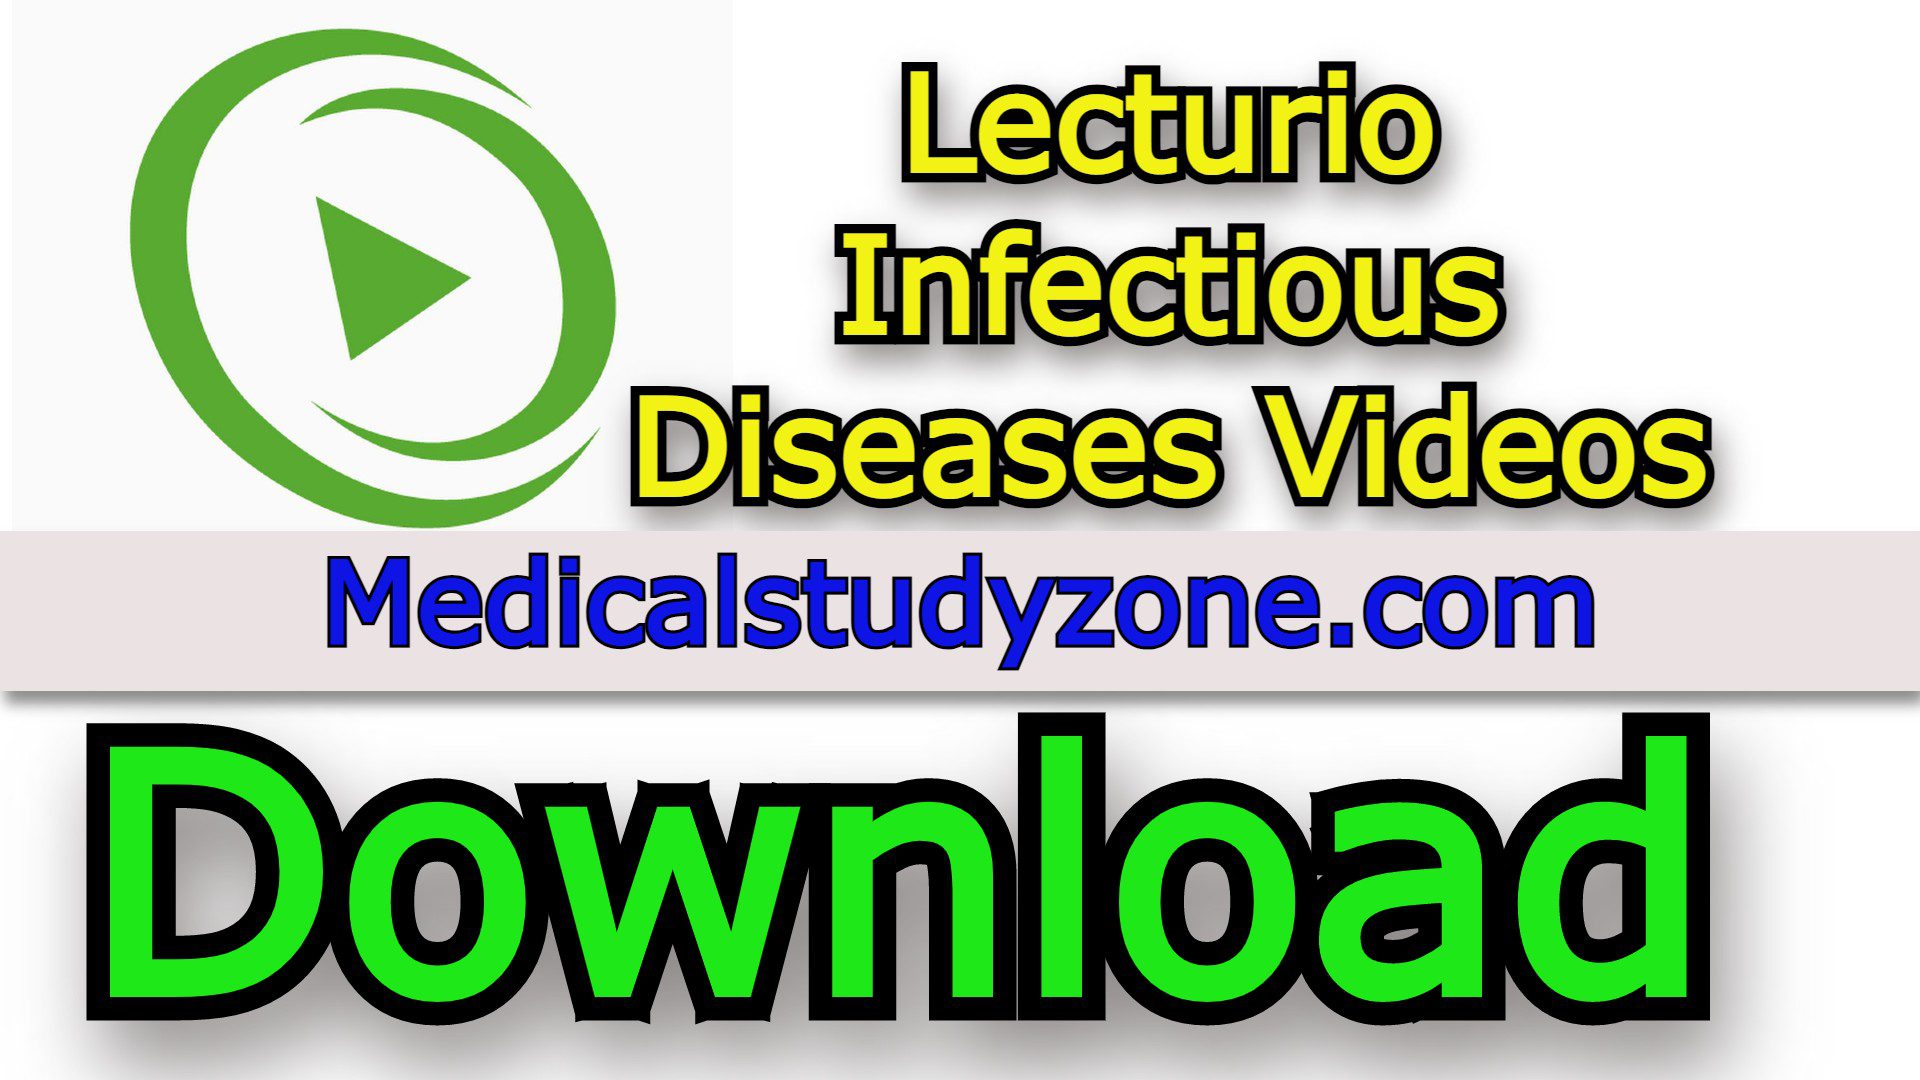 Lecturio Infectious Diseases Videos 2021 Free Download